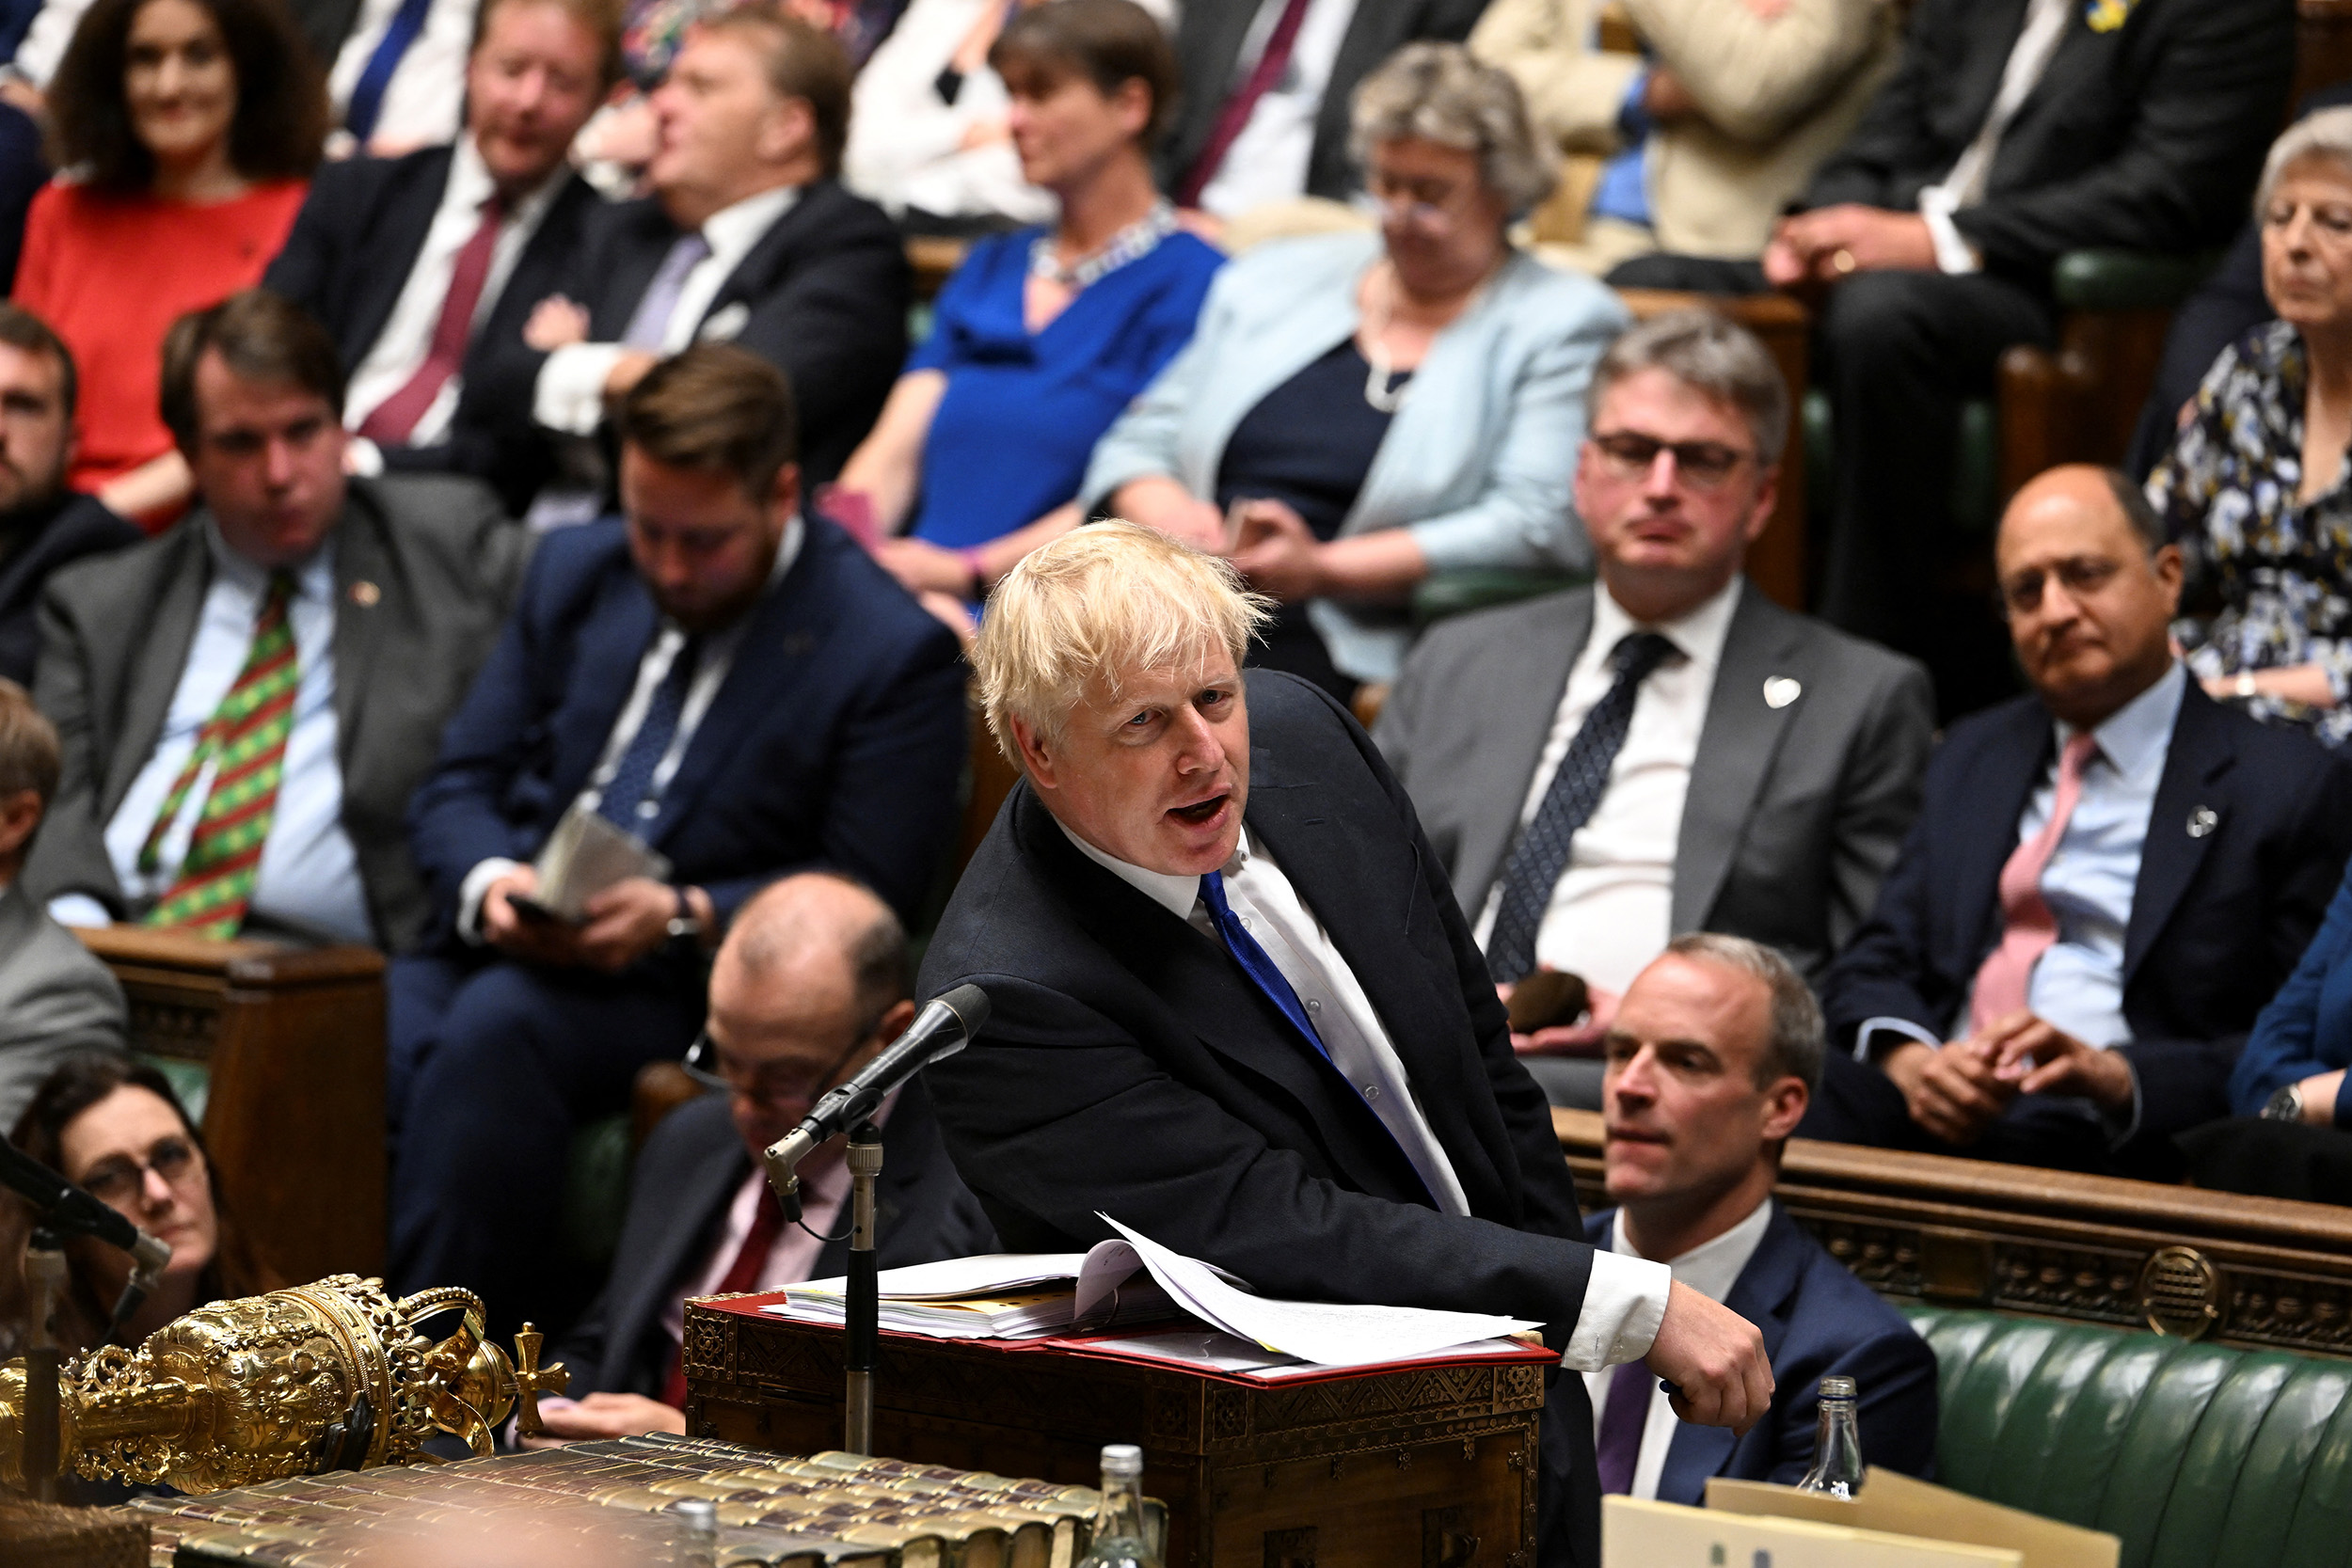 British Prime Minister Boris Johnson speaks during Prime Minister's Questions at the House of Commons in London, England, on July 6.